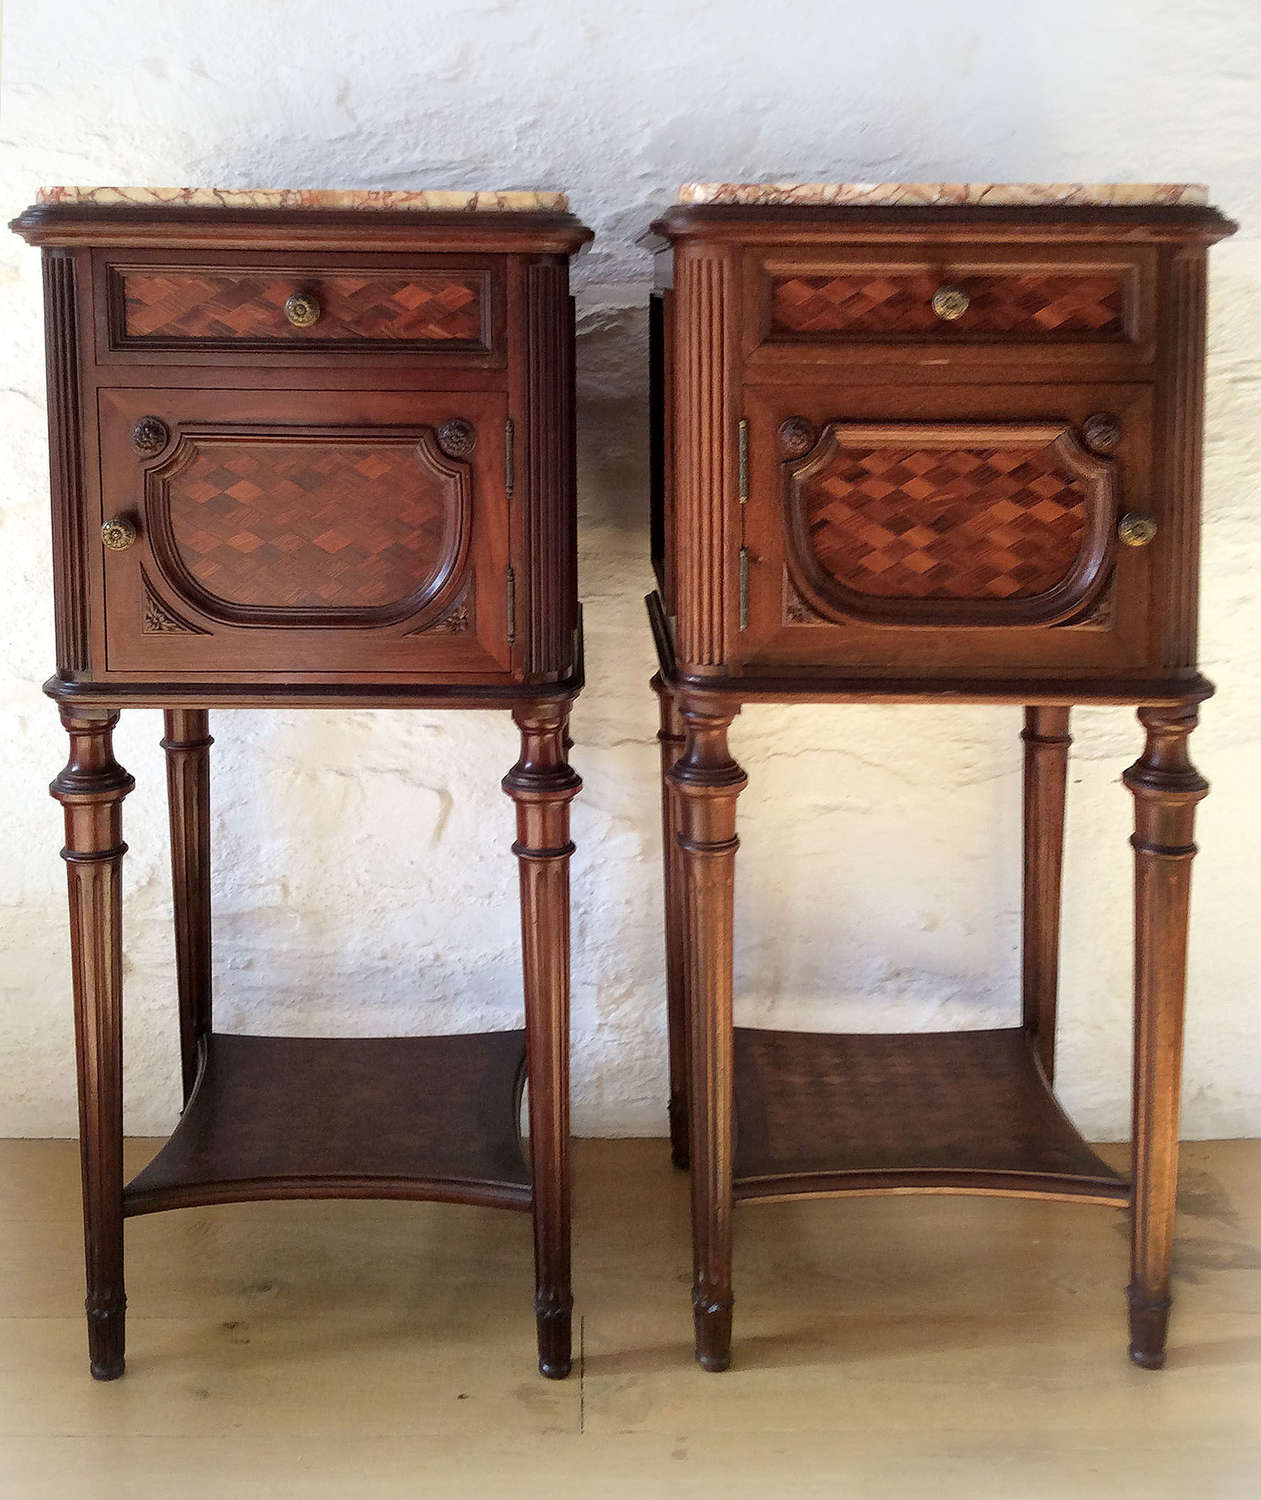 Pair of 19th Century Louis XVI style Bedsides